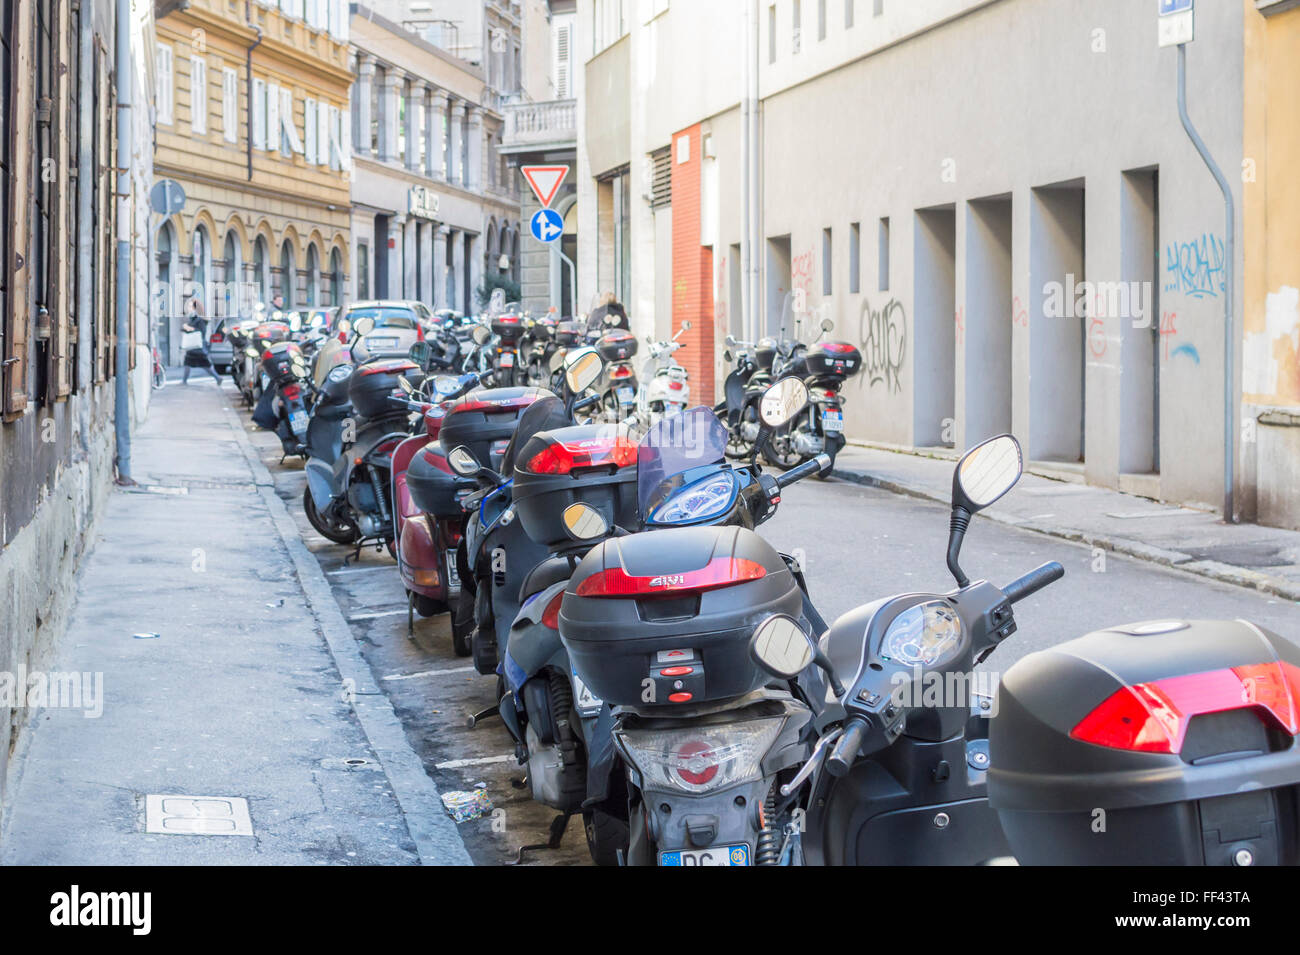 Trieste, Italy - February 5, 2016: motorcycles parked in designated areas. Stock Photo